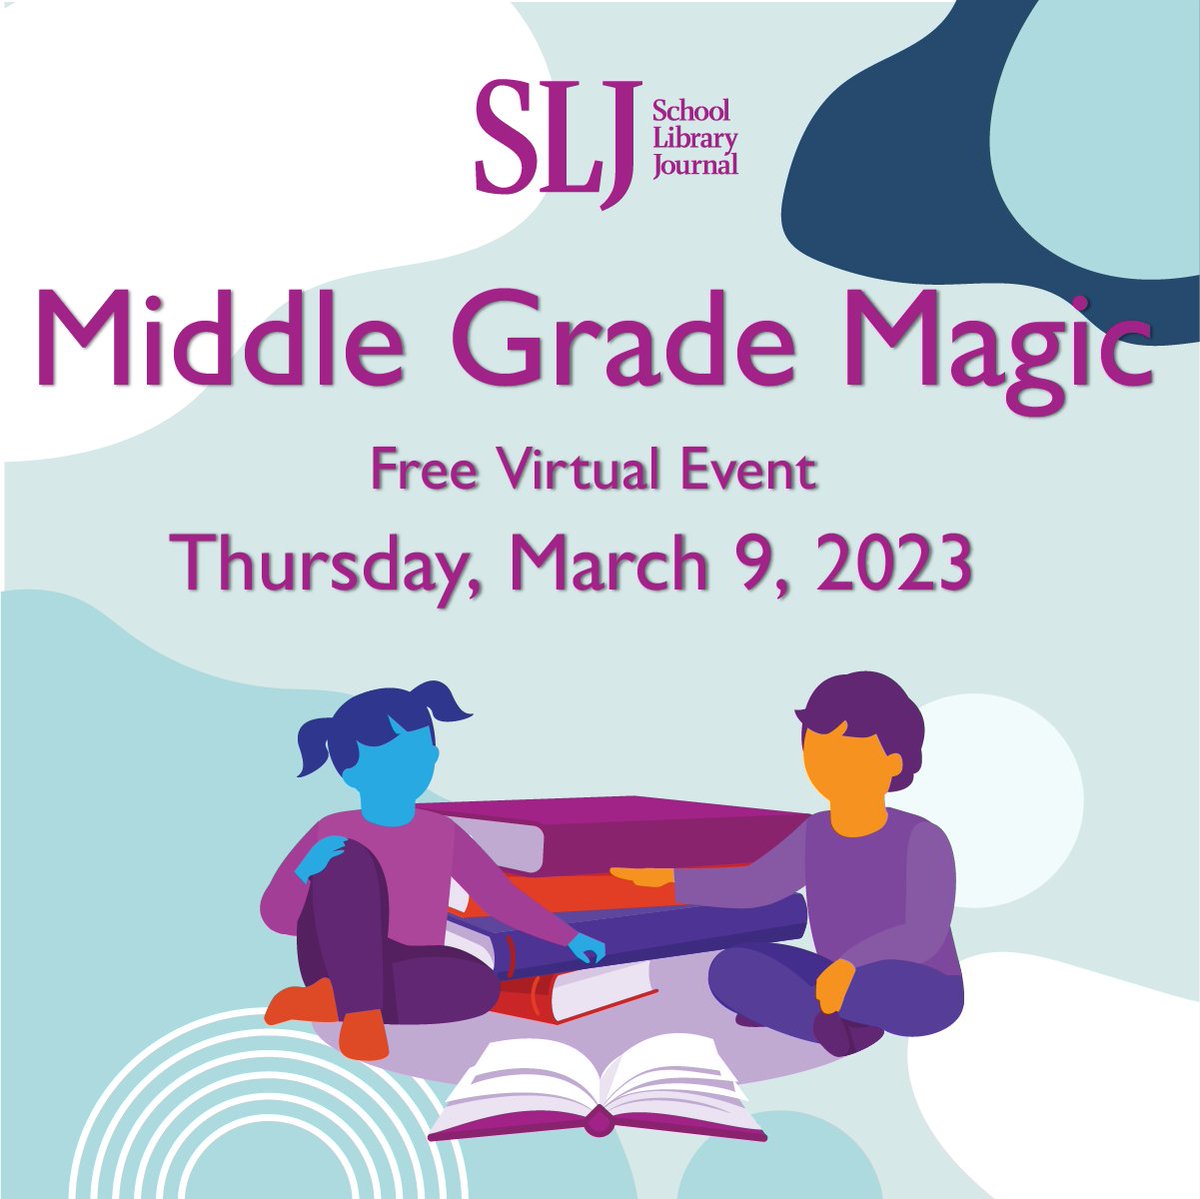 So excited to be on a panel for #MiddleGradeMagic on Novels in Verse with @thushponweera  ! It's free to register--hope to see you there!

#educators #librarians #mglibrarians #Teachers 
slj.com/event/middle-g…